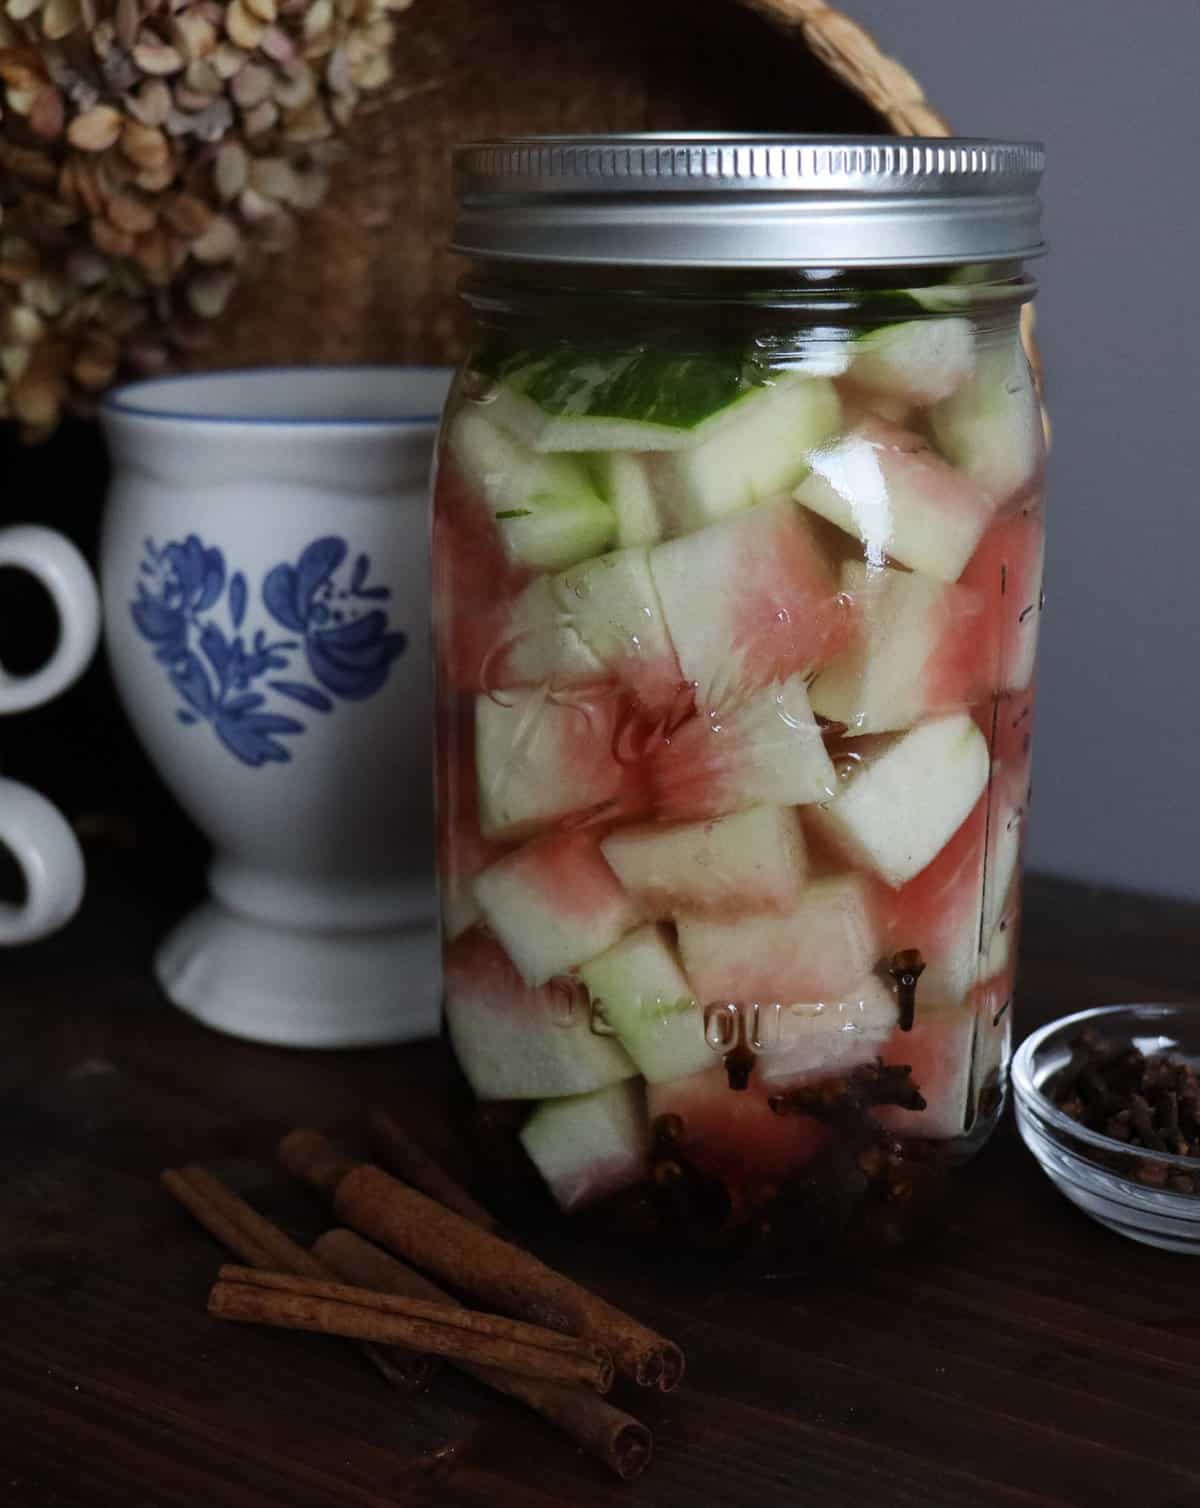 watermelon rinds pickling in a jar with cinnamon sticks and cloves